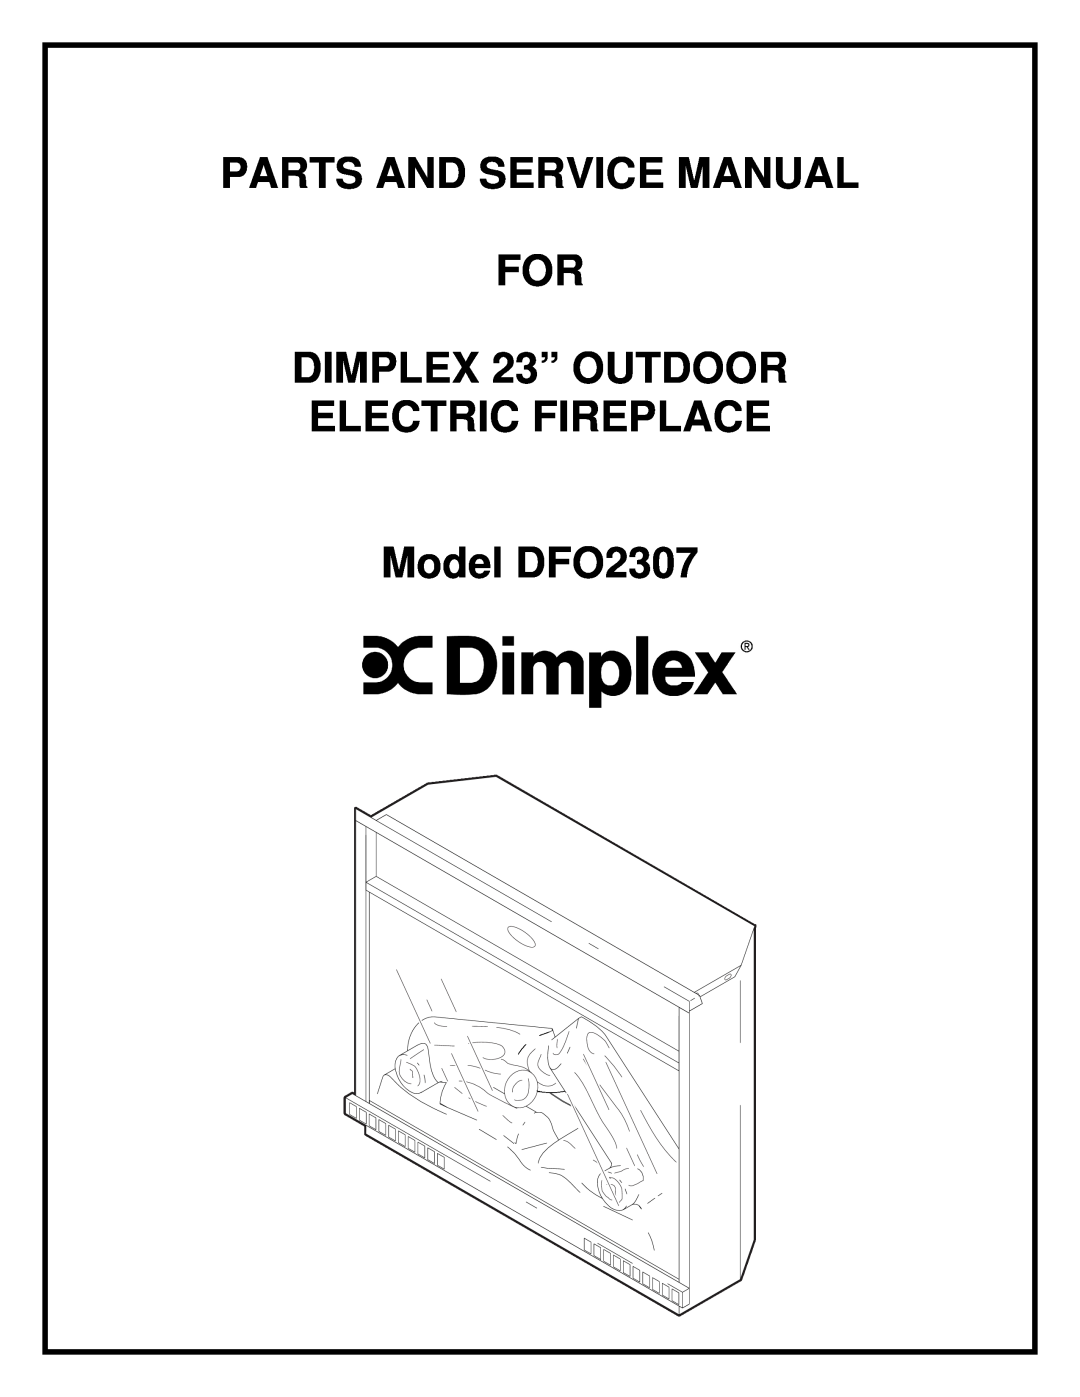 Dimplex service manual FOR DIMPLEX 23” OUTDOOR ELECTRIC FIREPLACE, Model DFO2307 